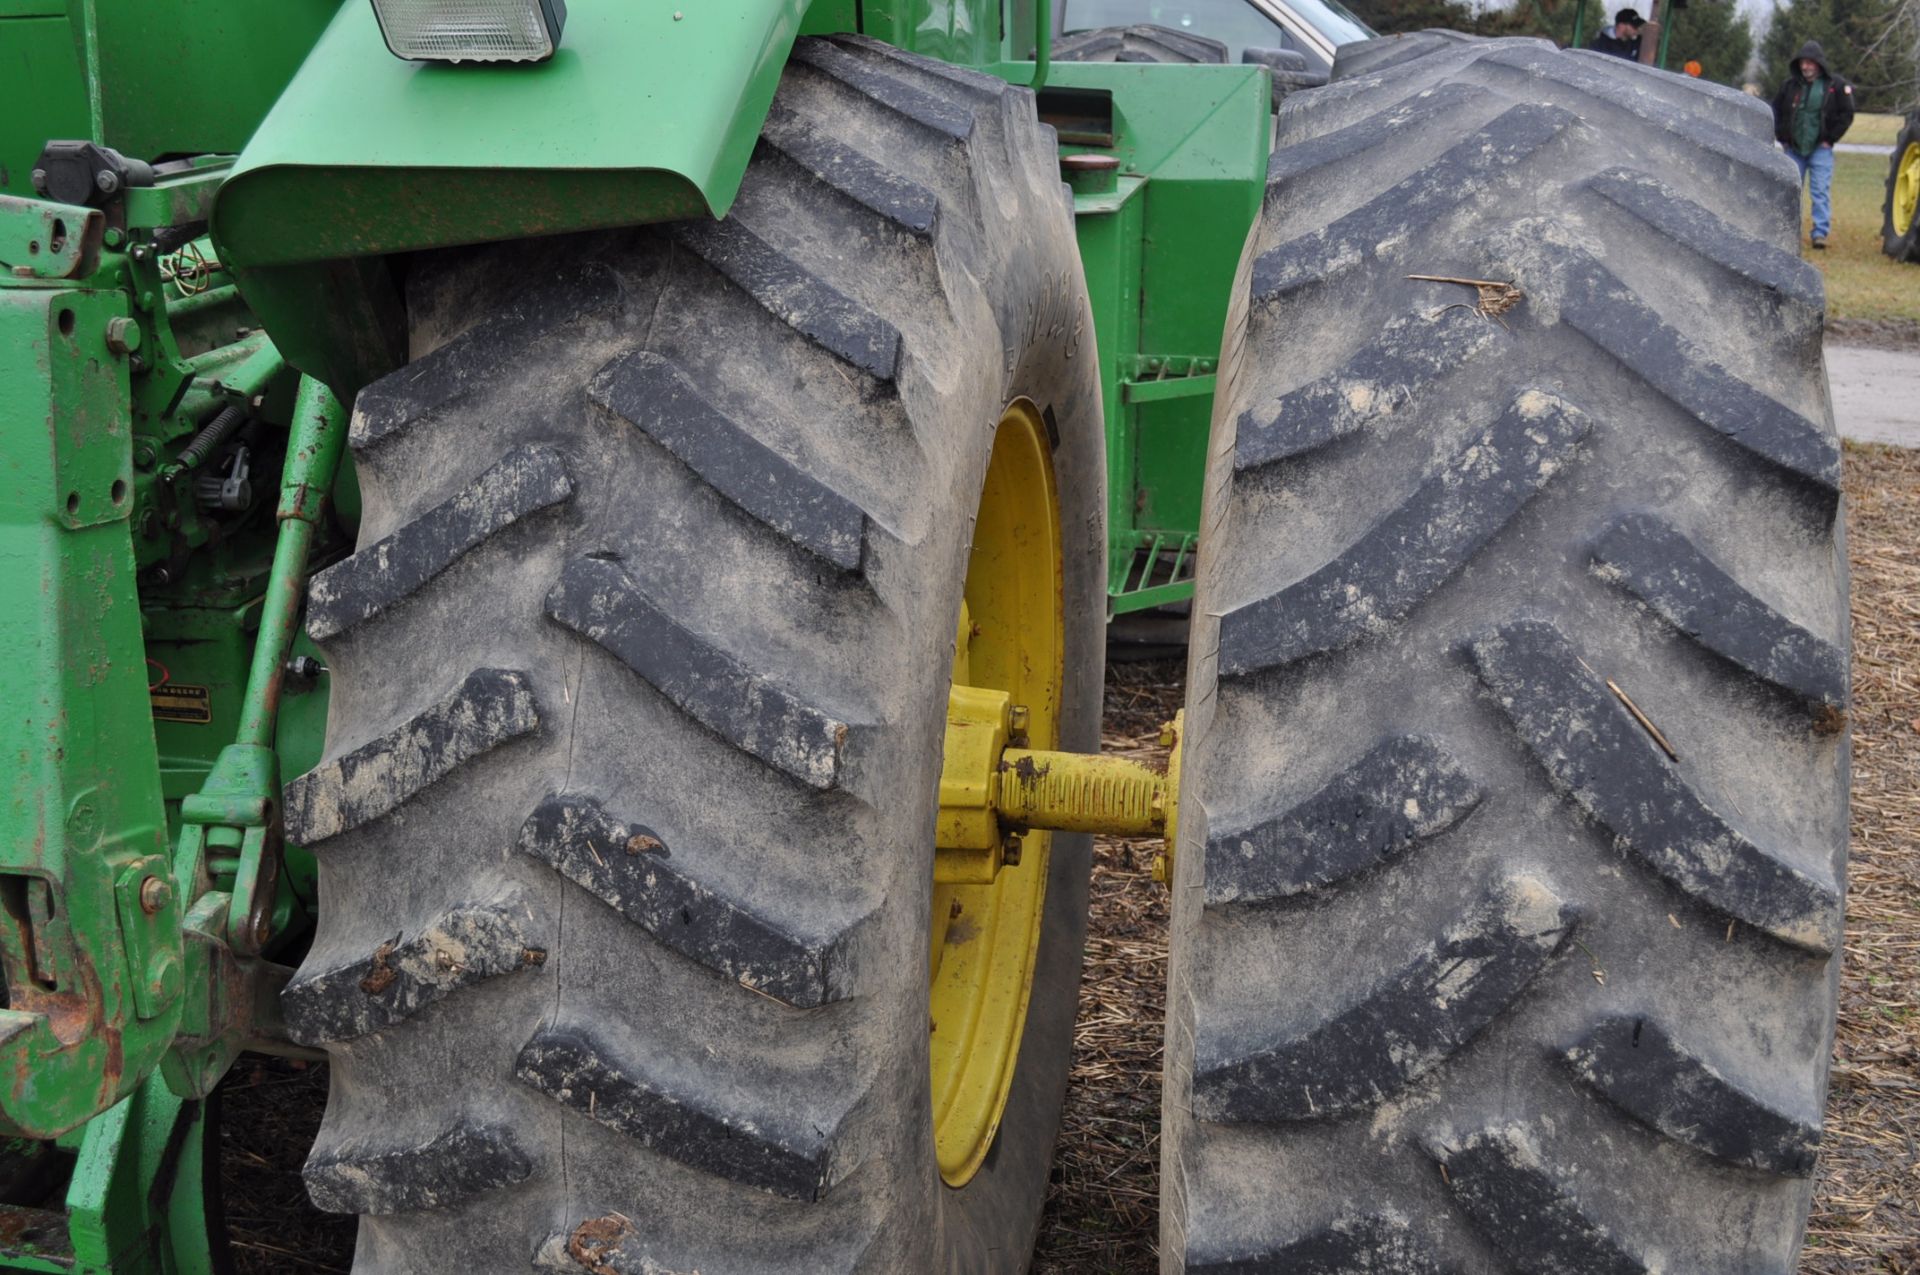 John Deere 8430 tractor, 4WD, diesel, 20.8-34 duals, CHA, Quad range, 3 hyd remotes, 1000 pto, 3 pt, - Image 7 of 19